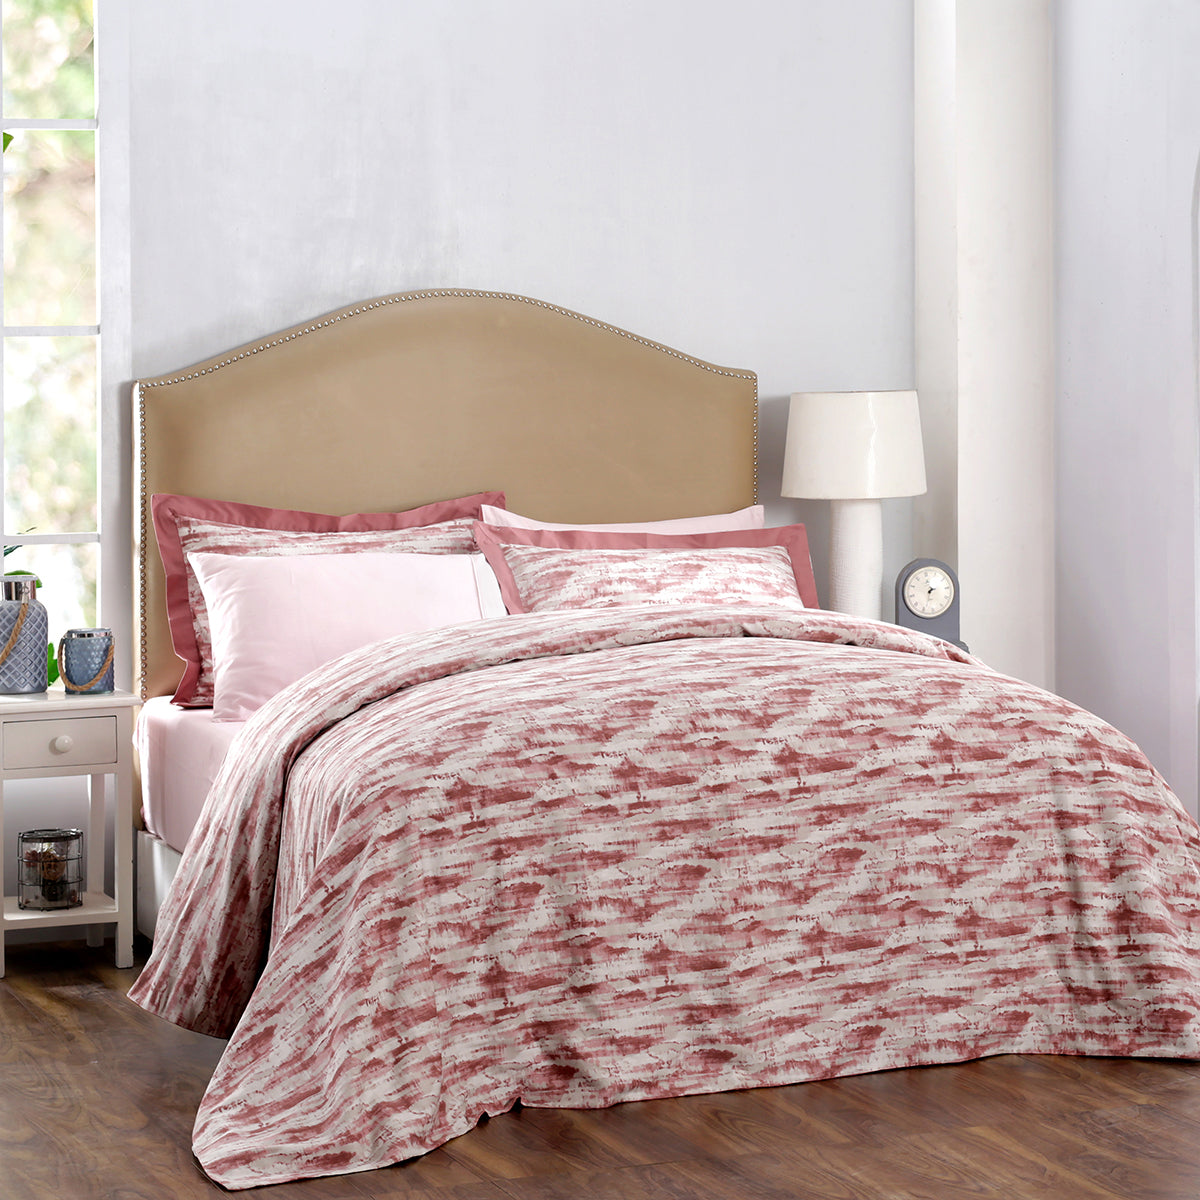 Meyer Textura Plain & Printed Reversible 100% Cotton Super Soft Red Duvet Cover with Pillow Case